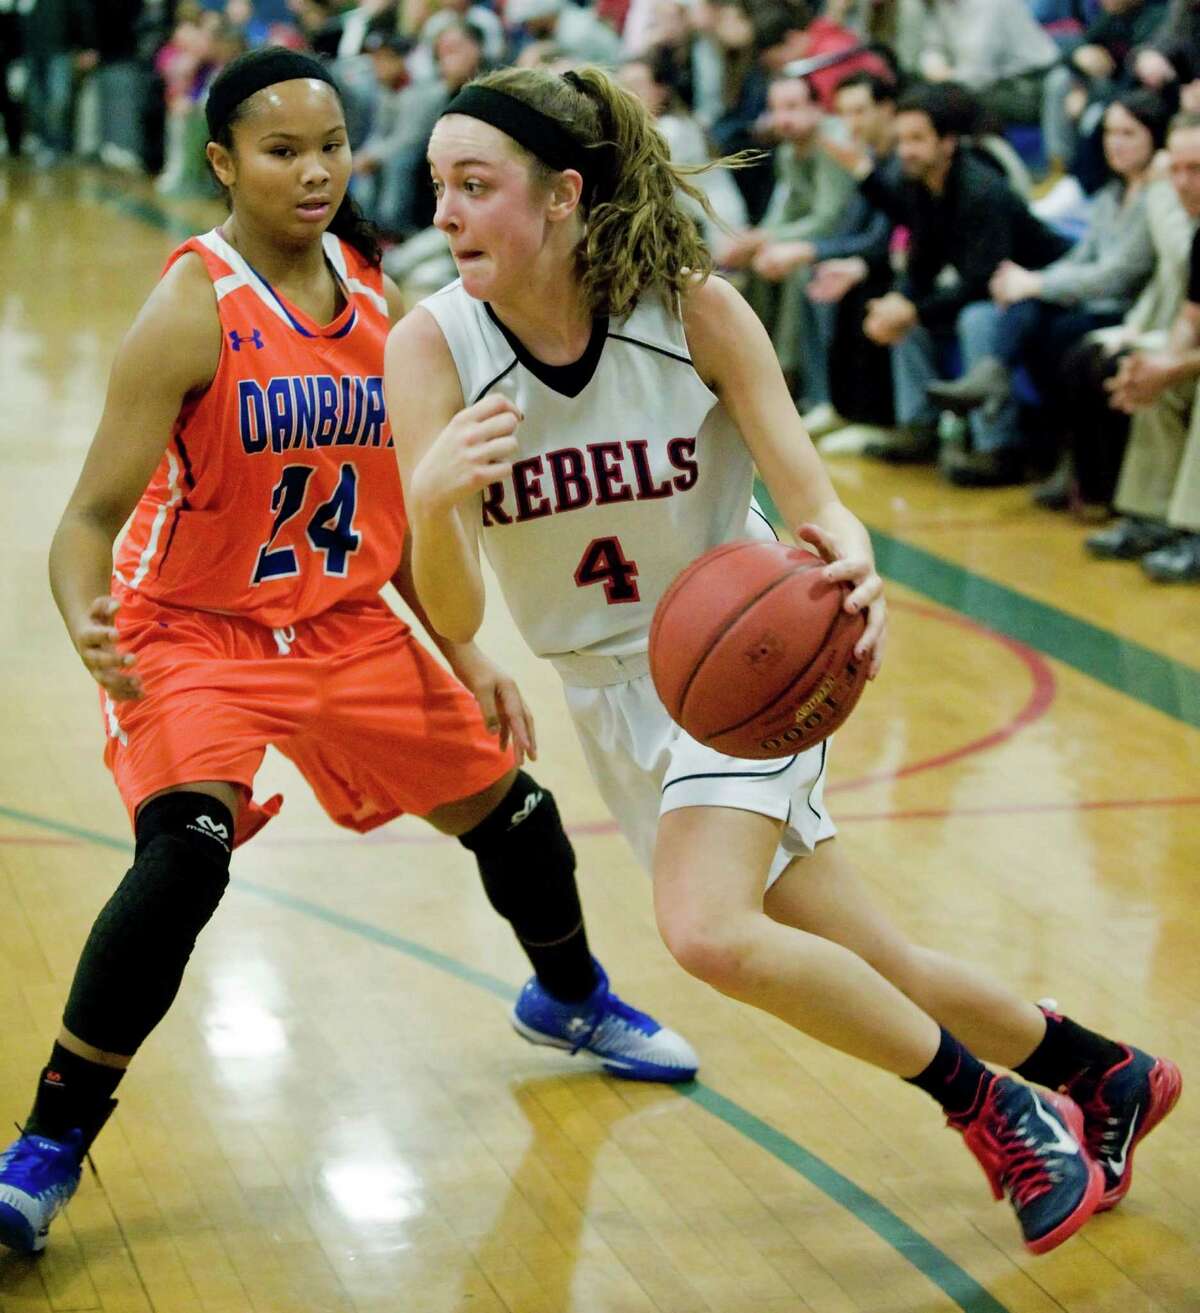 Danbury High’s Ty'Lynn Ith, left, tries to block New Fairfield’s Bridget Zima in the News-Times Greater Danbury Holiday Festival championship game Wednesday at the Danbury War Memorial. The Rebels won 70-28 and Zima earned tournament MVP honors.